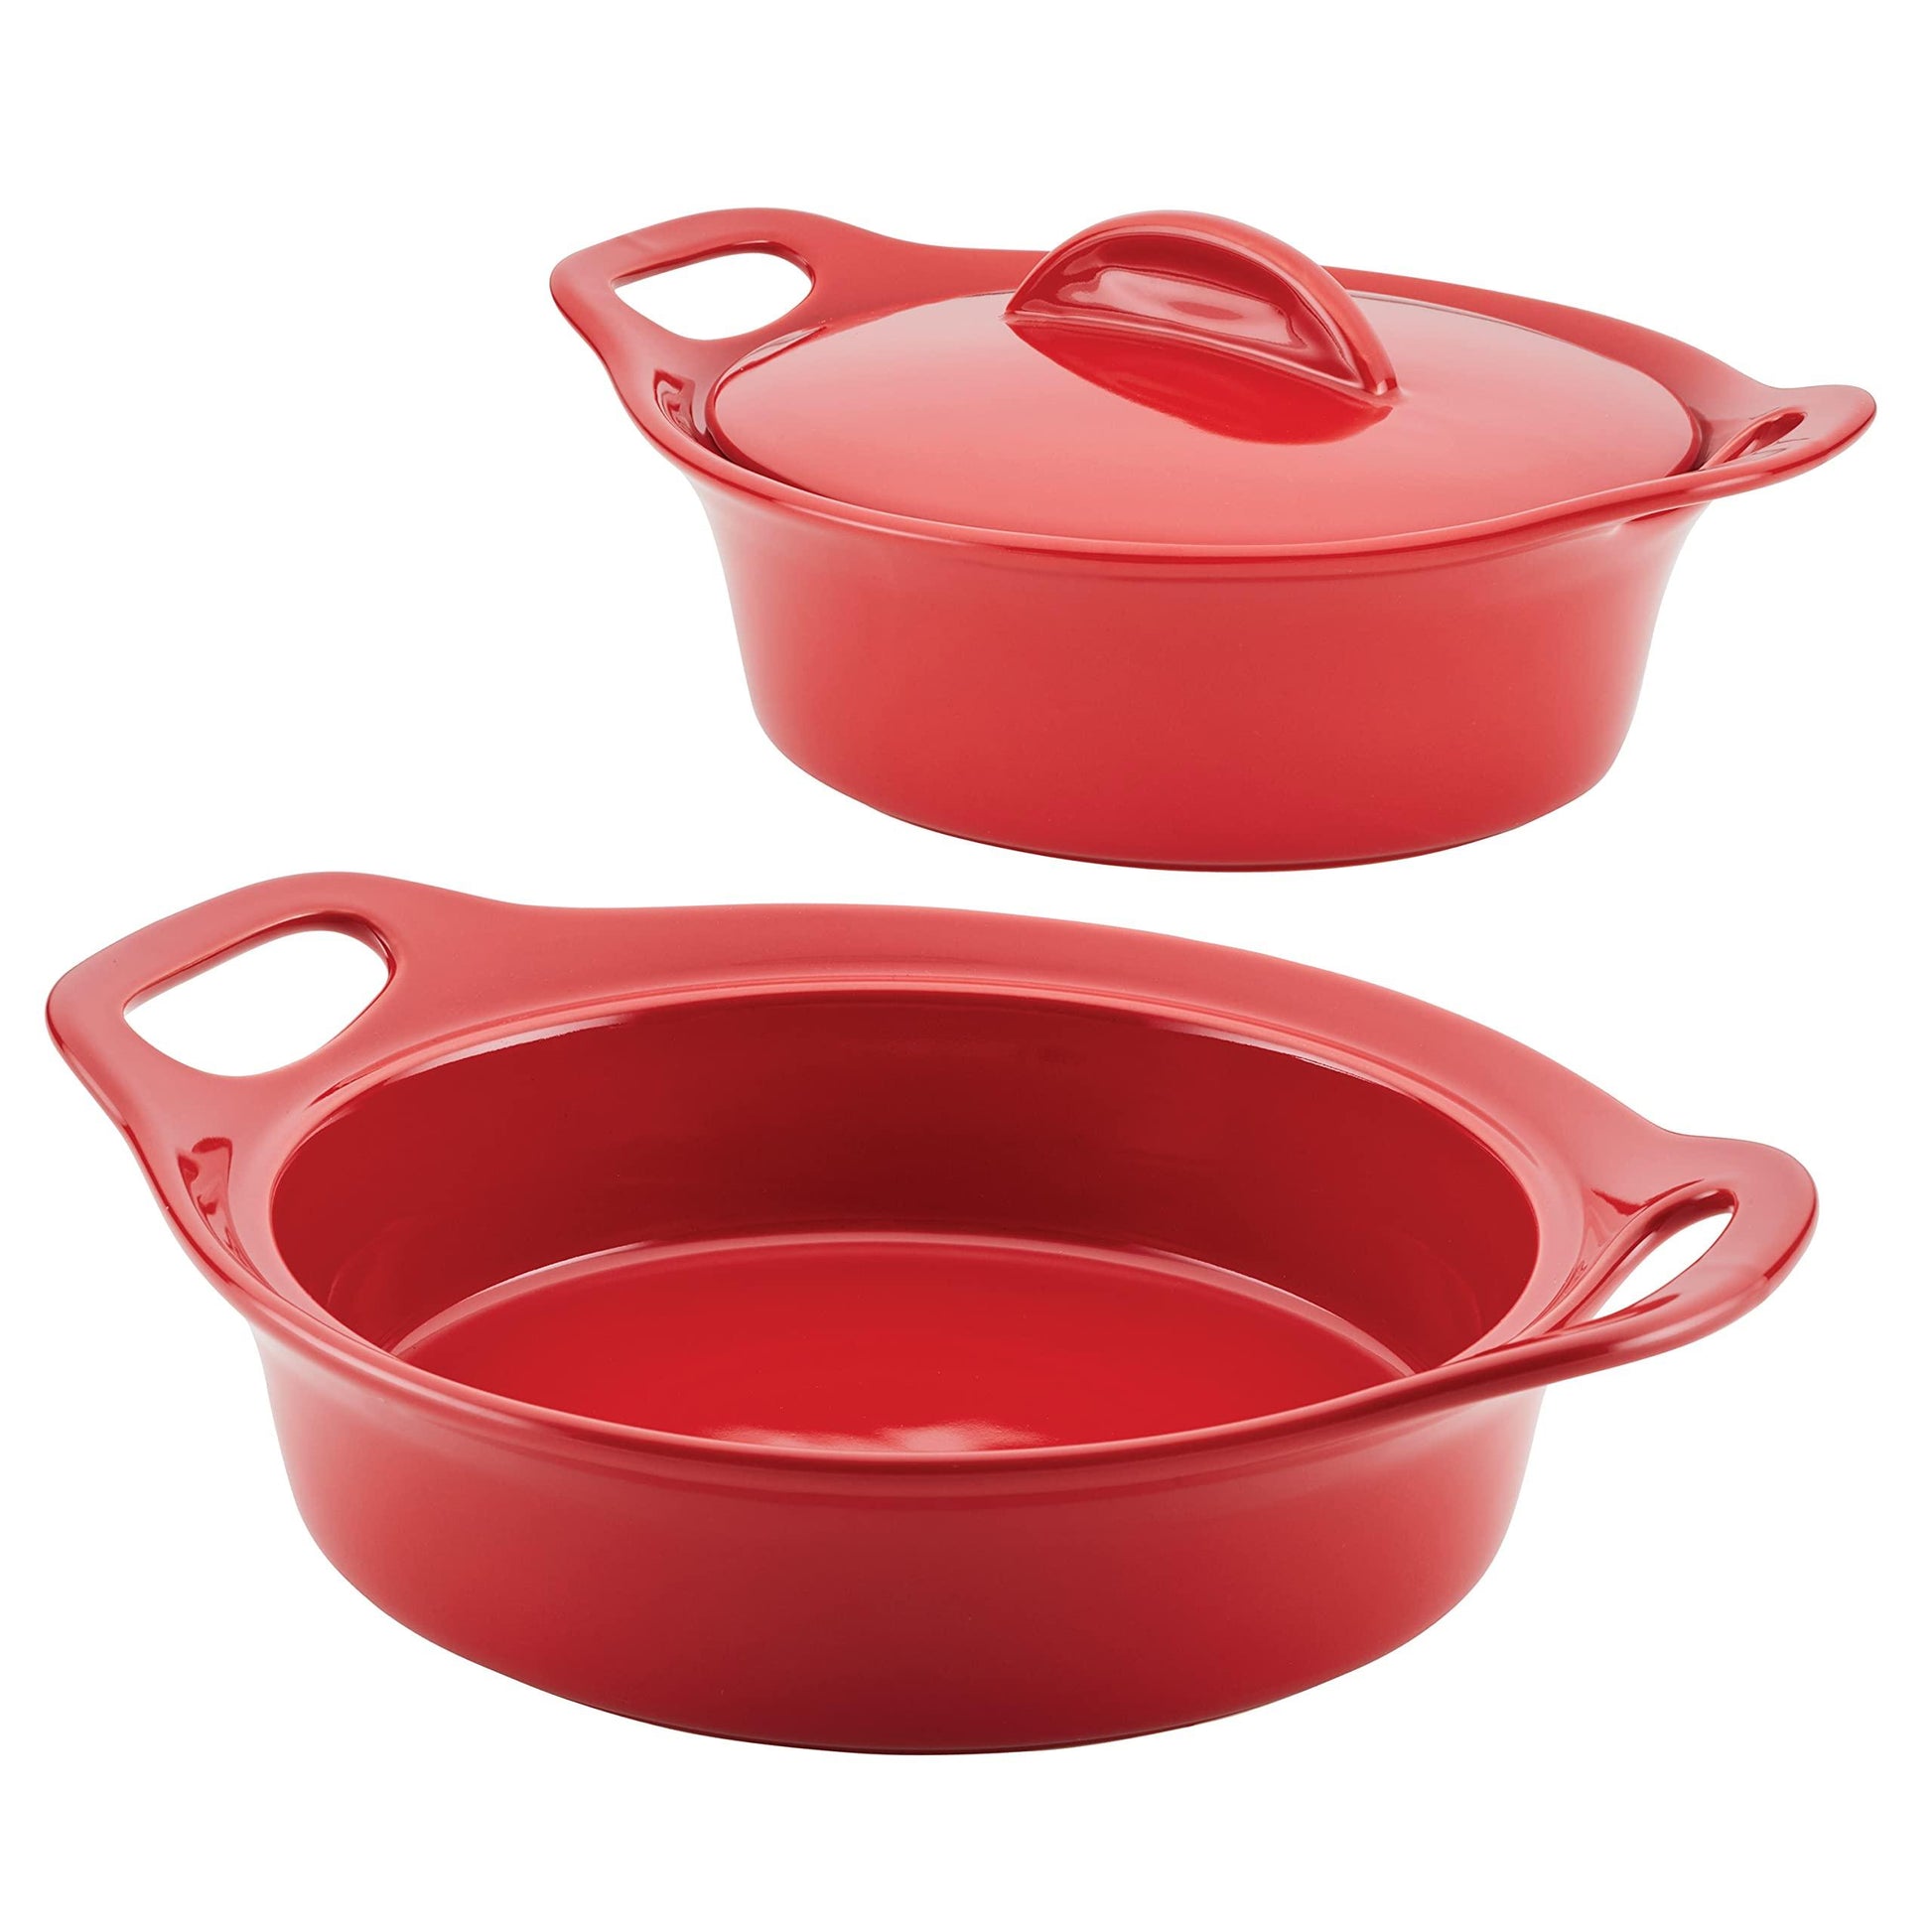 Rachael Ray Solid Glaze Ceramics Casserole Bakers/Baking Dish with Shared Lid Set, 3 Piece, Red - CookCave